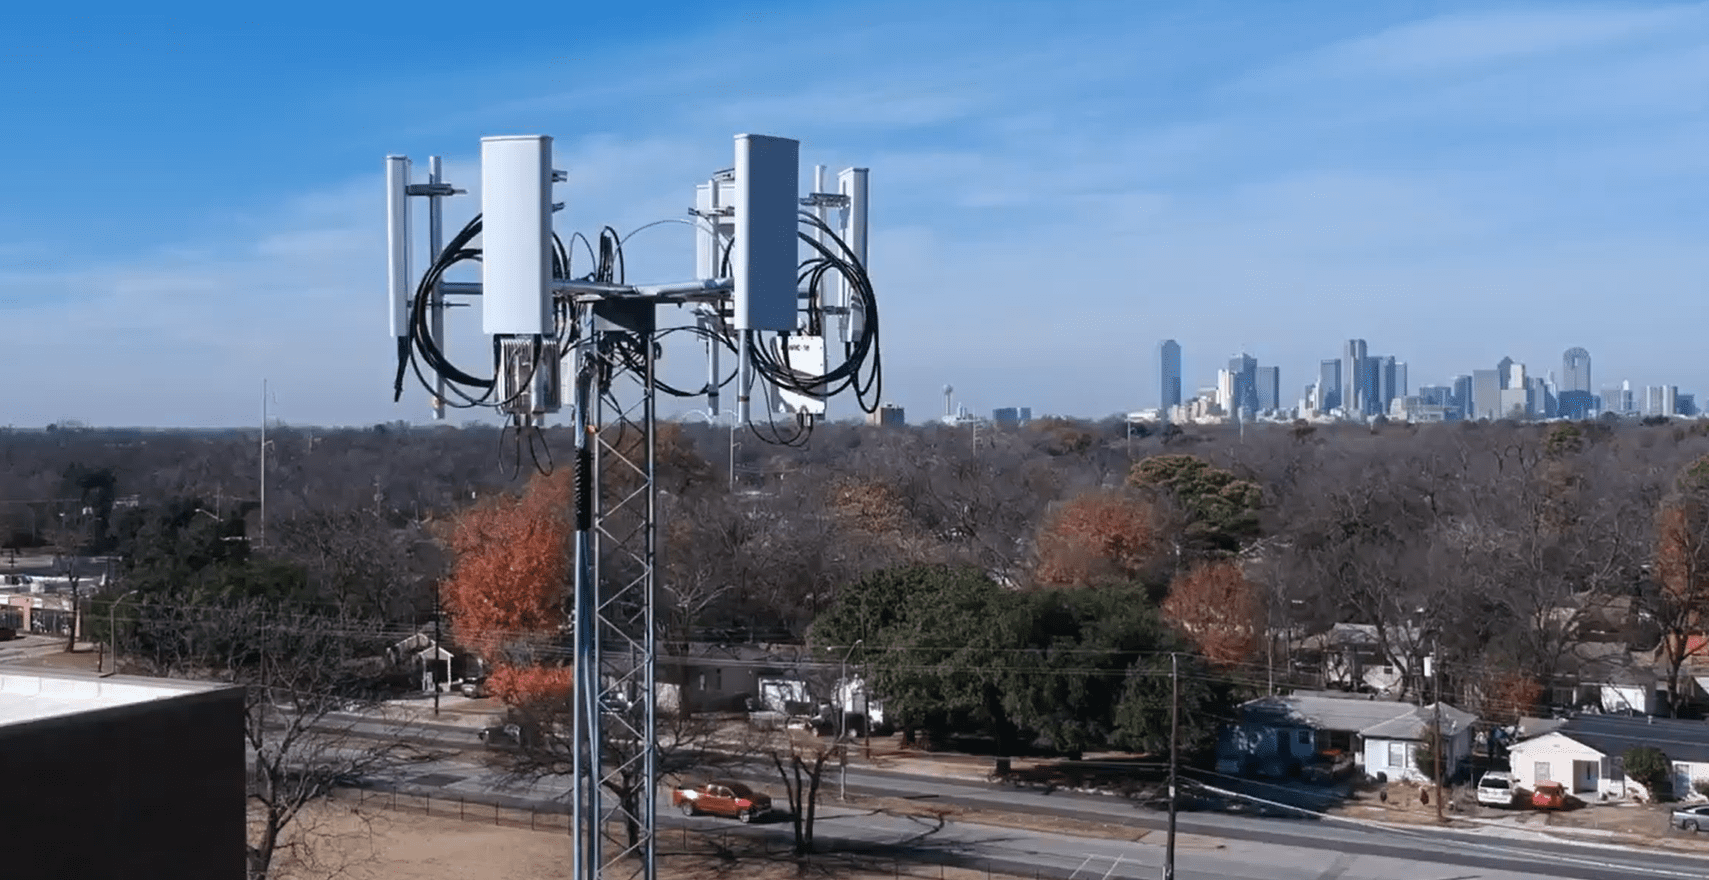 Alpha Wireless Equips Nextlink to Accelerate Broadband Internet Access Across American Midwest